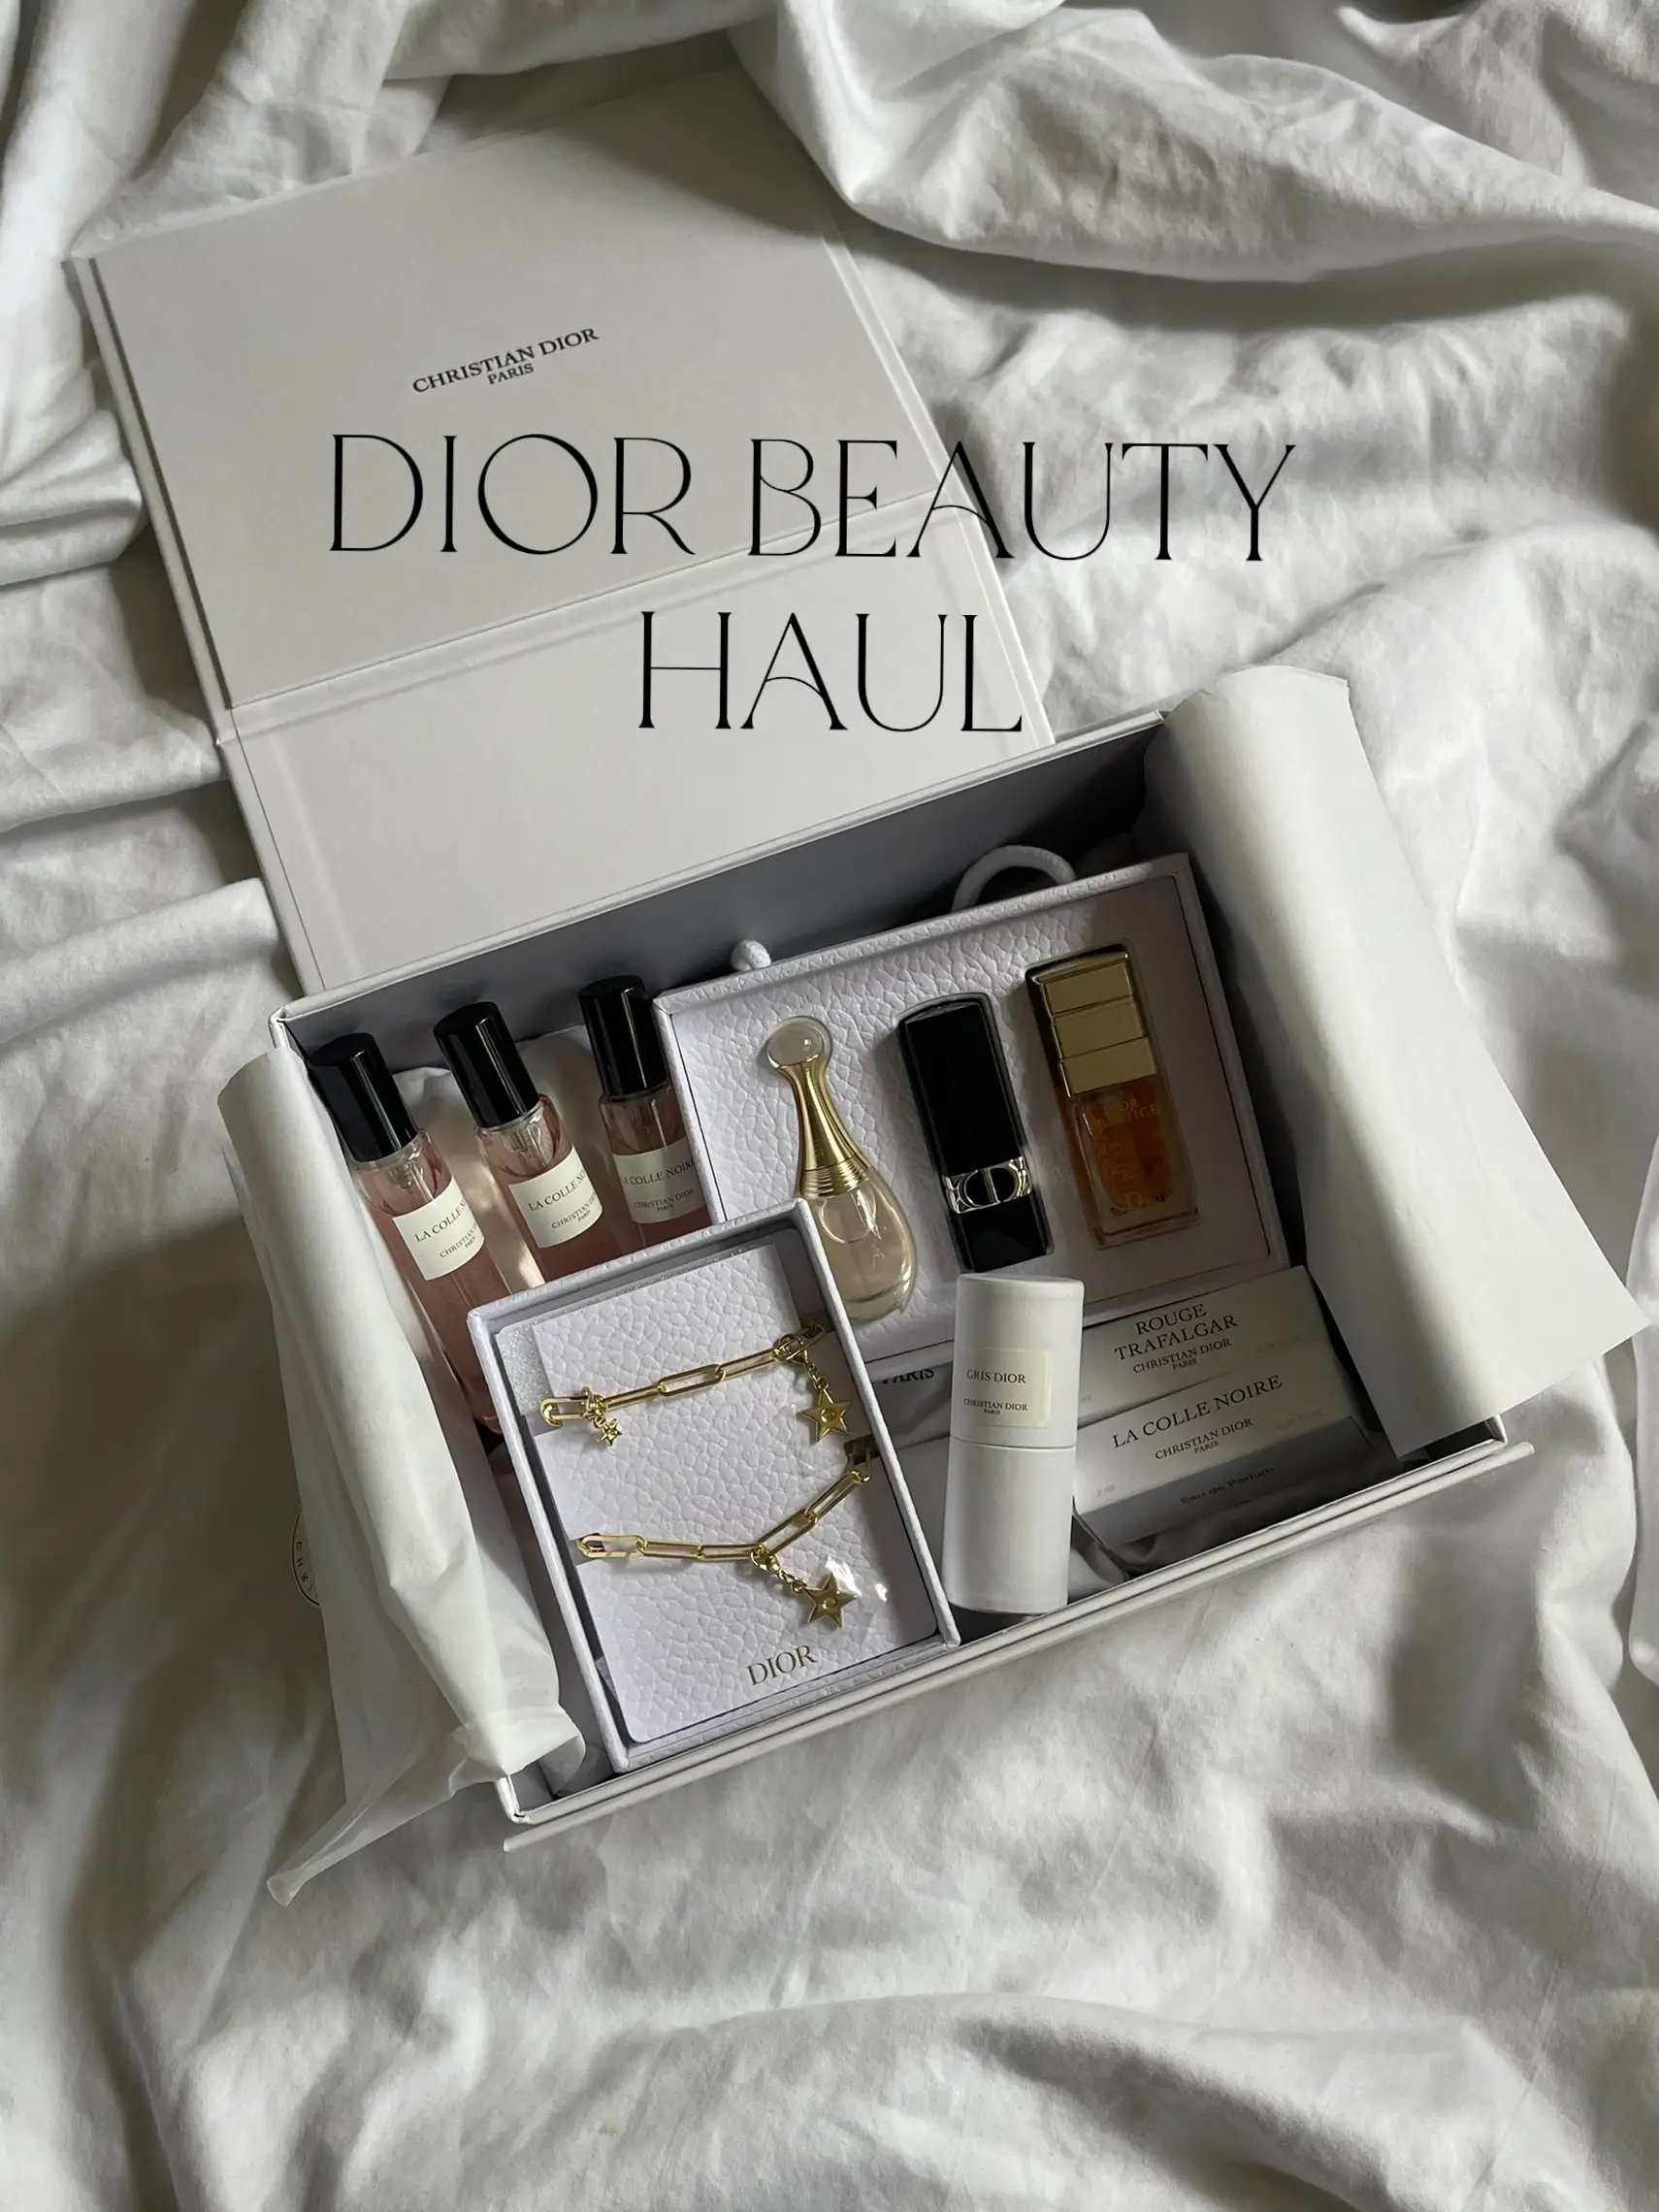 Time to Stock Up for the Week 🛒 Treat Yourself to Your Favorite Luxury  Designer Beauty Brands like @diorbeauty @diptyque @charlottetilbury …